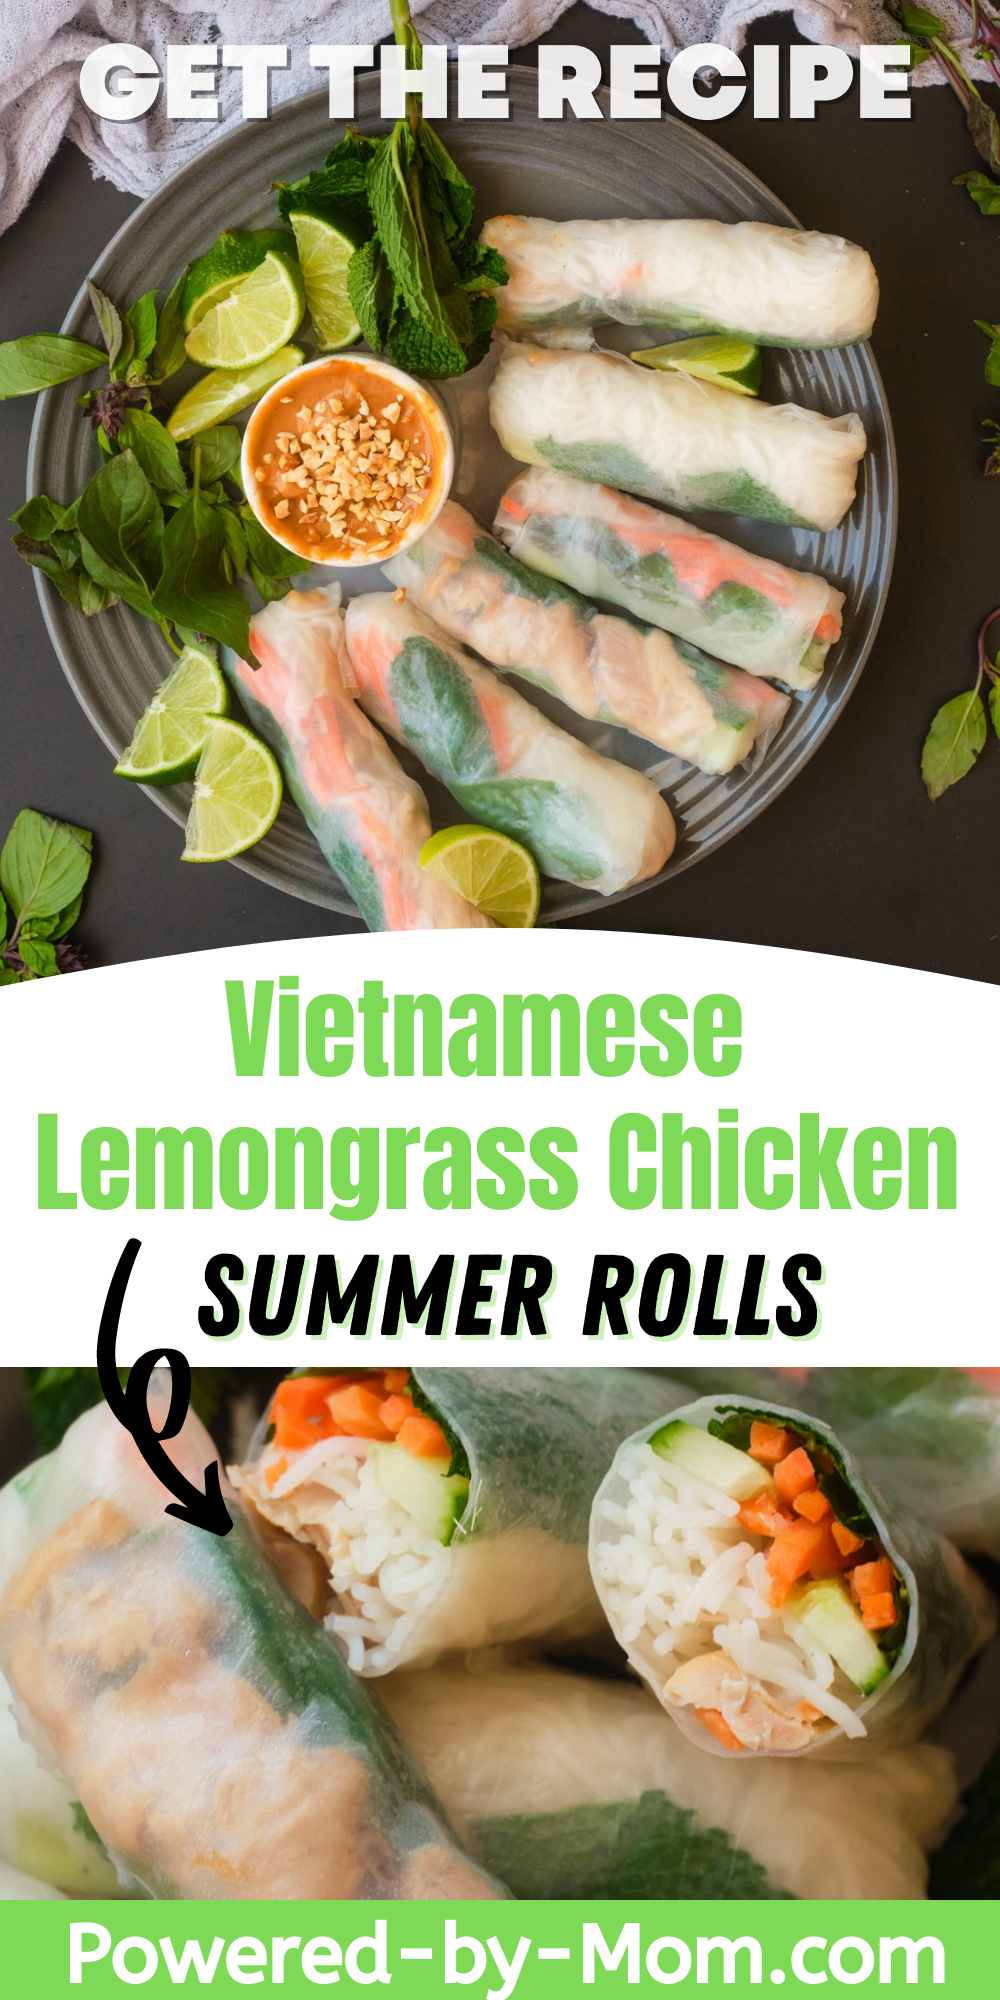 These Vietnamese Lemongrass Chicken Summer Rolls are full of flavour and a delicious and healthy snack or meal. Get the recipe now.